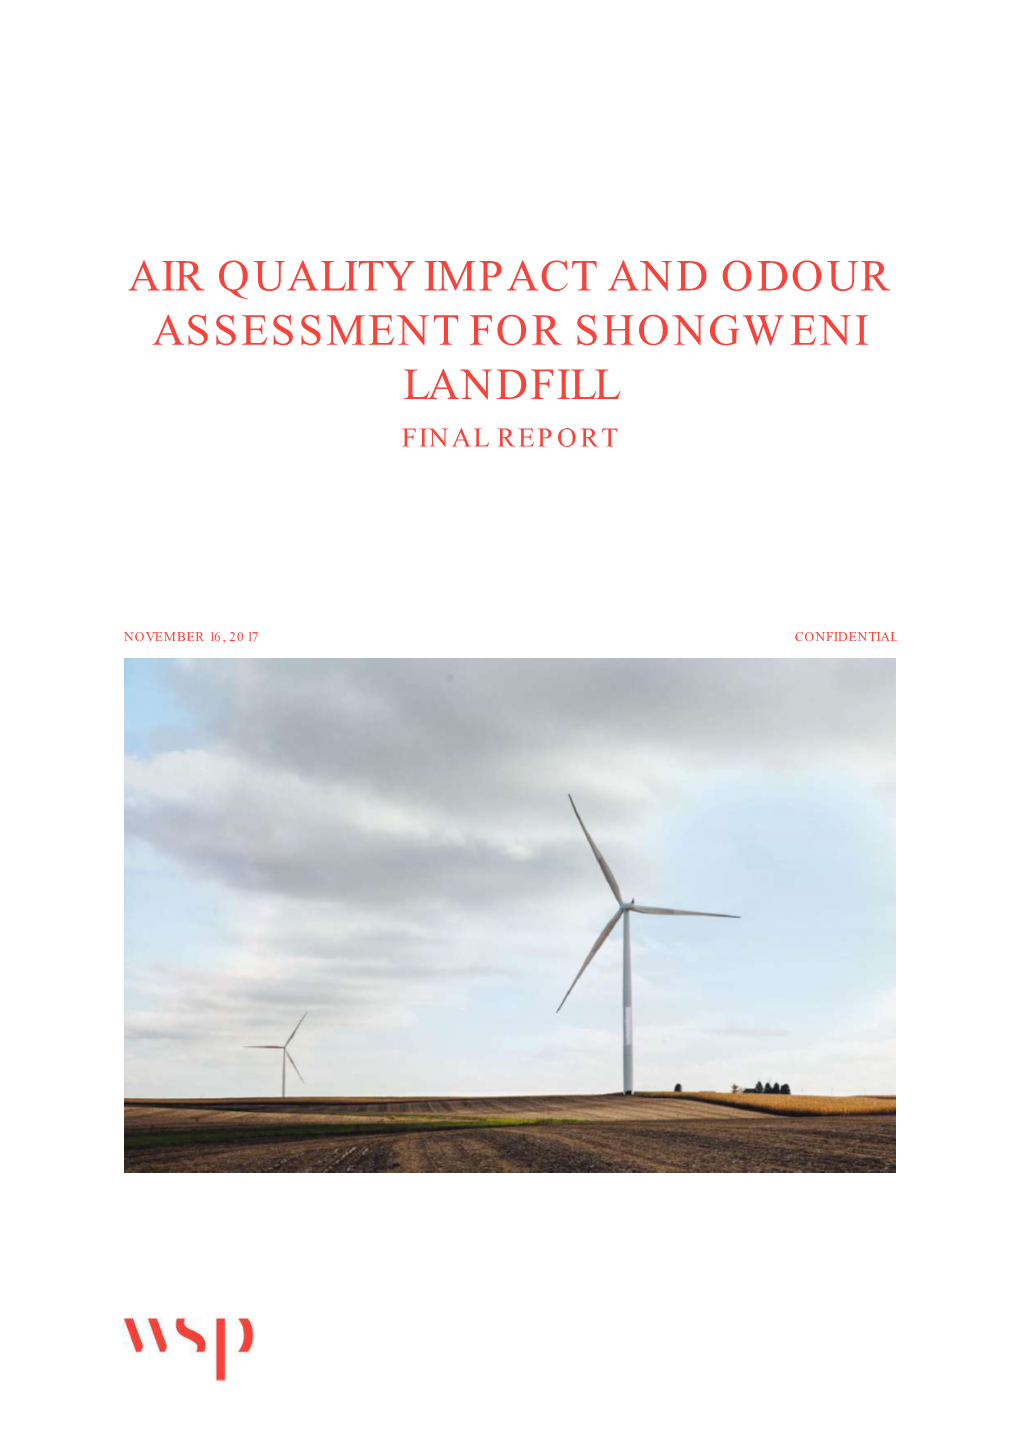 Air Quality Impact and Odour Assessment for Shongweni Landfill Final Report